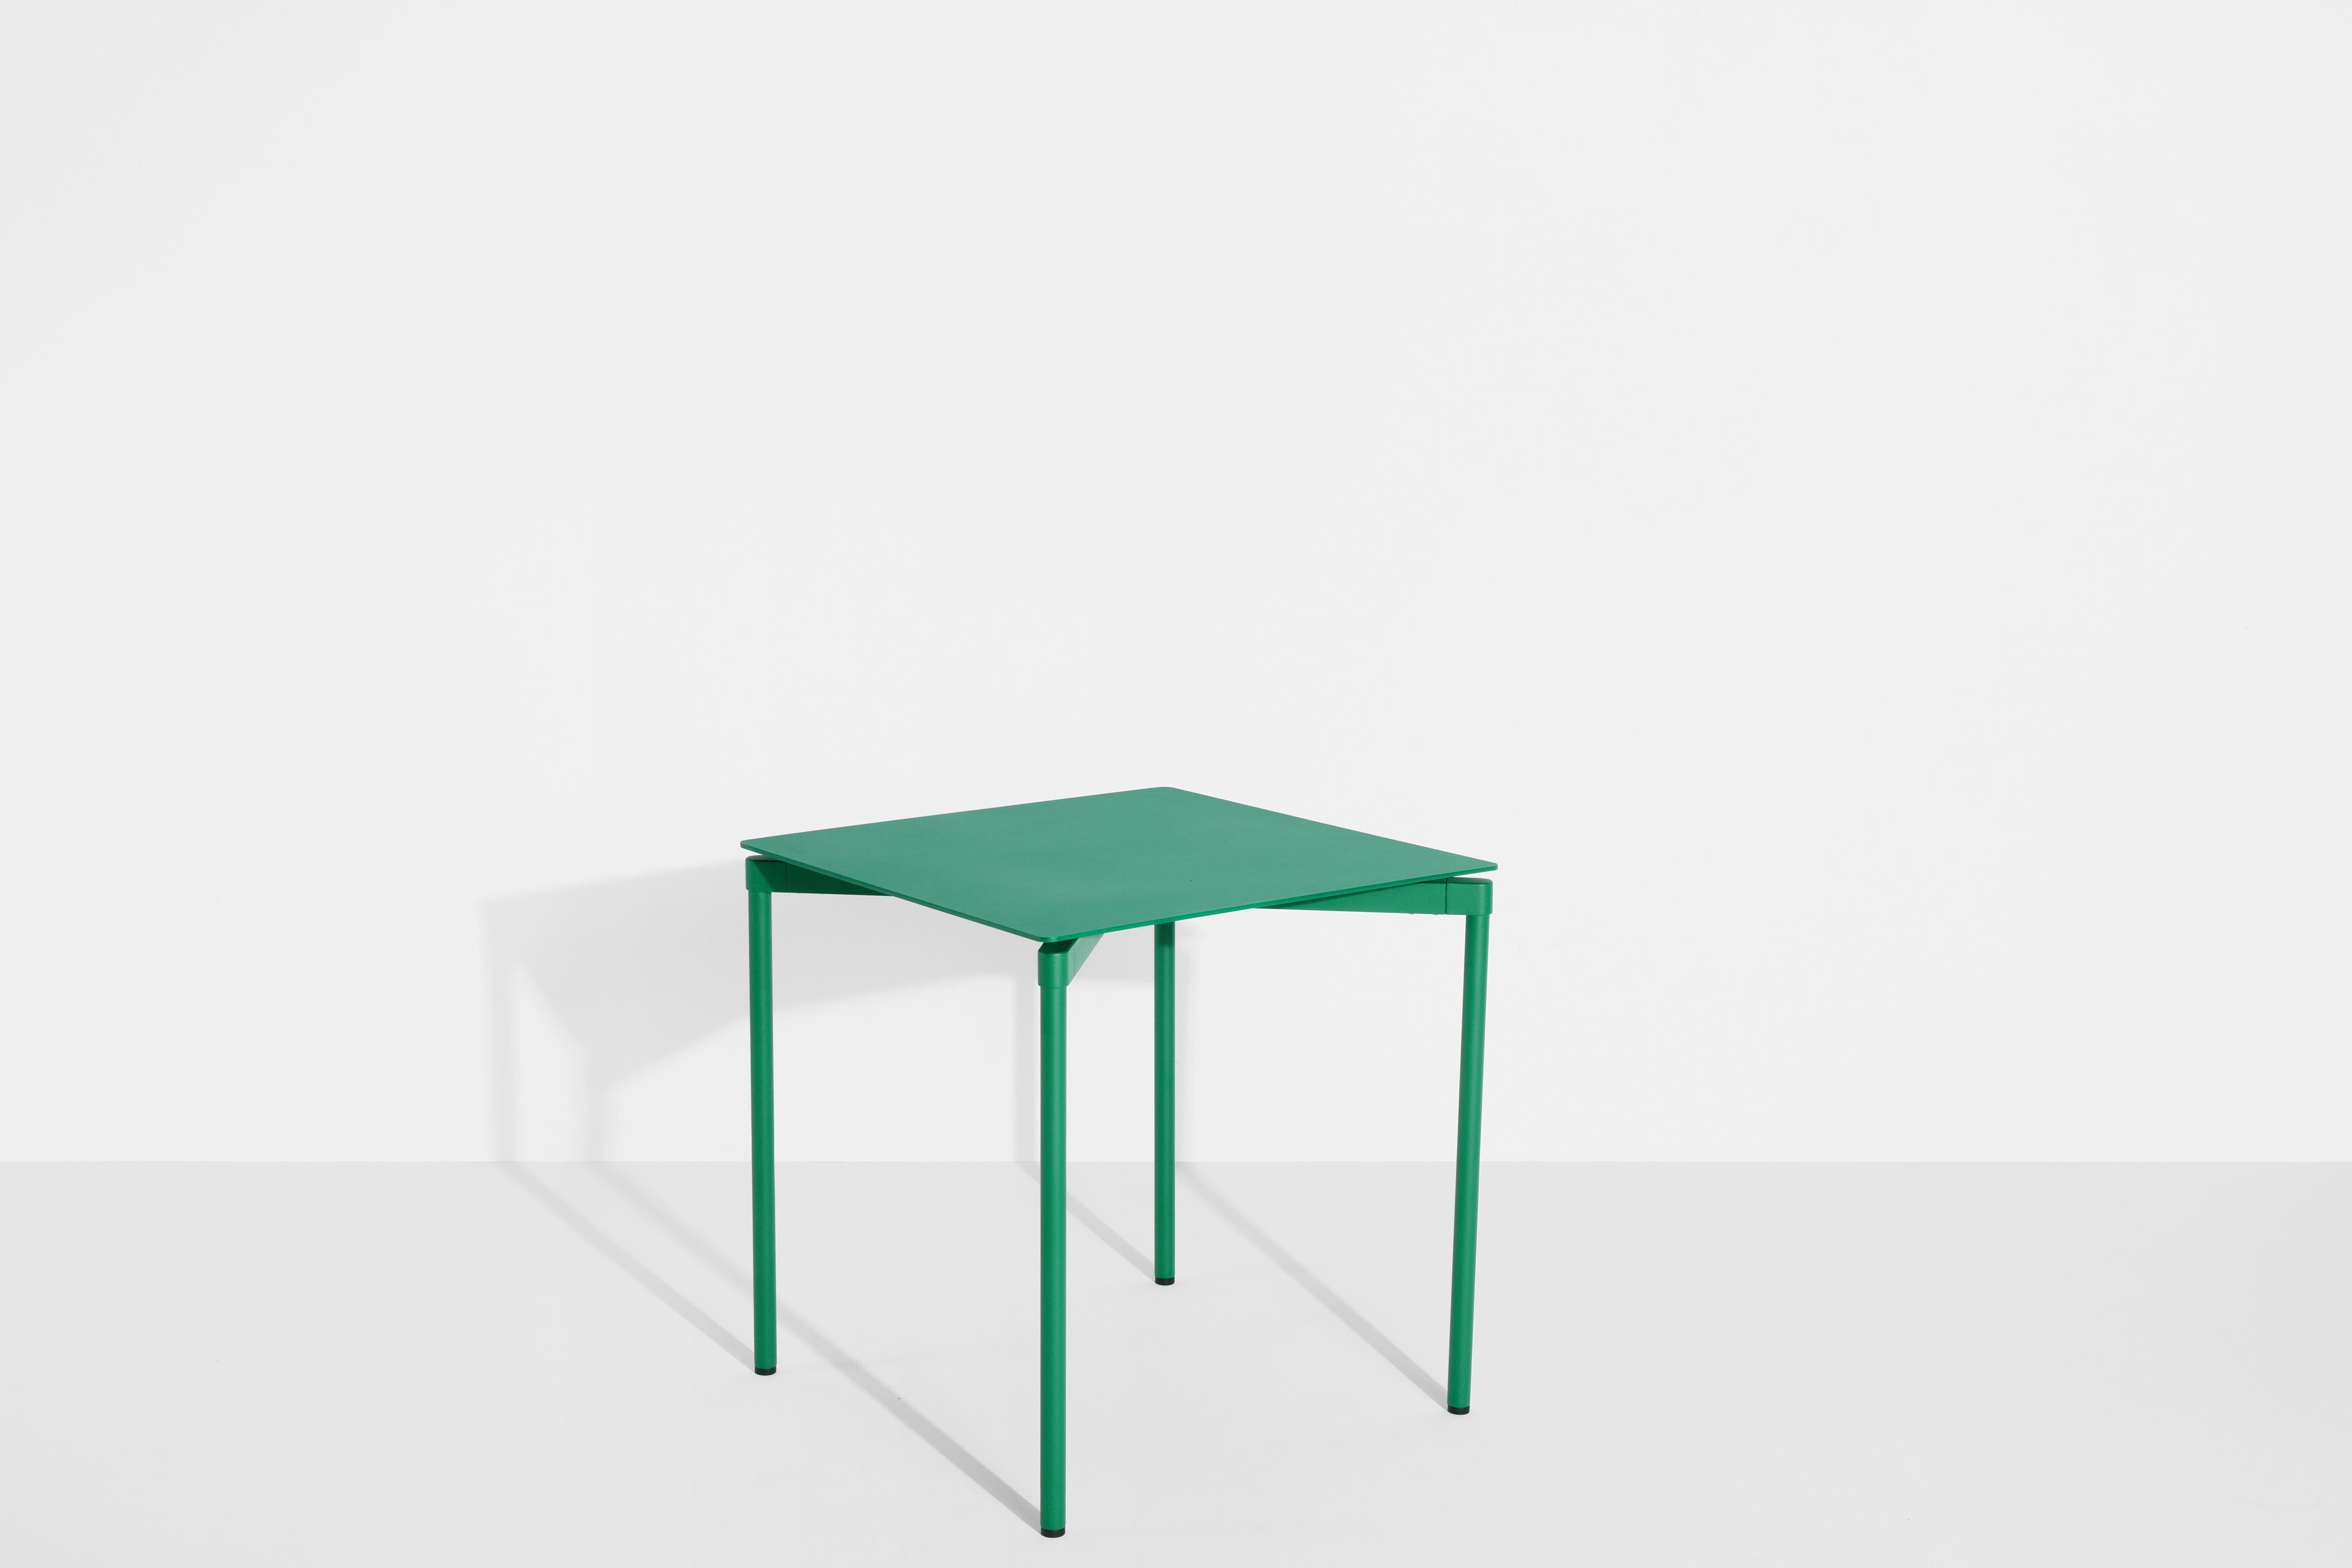 Petite Friture Fromme Square Table in Mint-green Aluminium by Tom Chung, 2020

The Fromme collection stands out by its pure line and compact design. Absorbers placed under the seating gives a soft and very comfortable flexibility to seats. Made